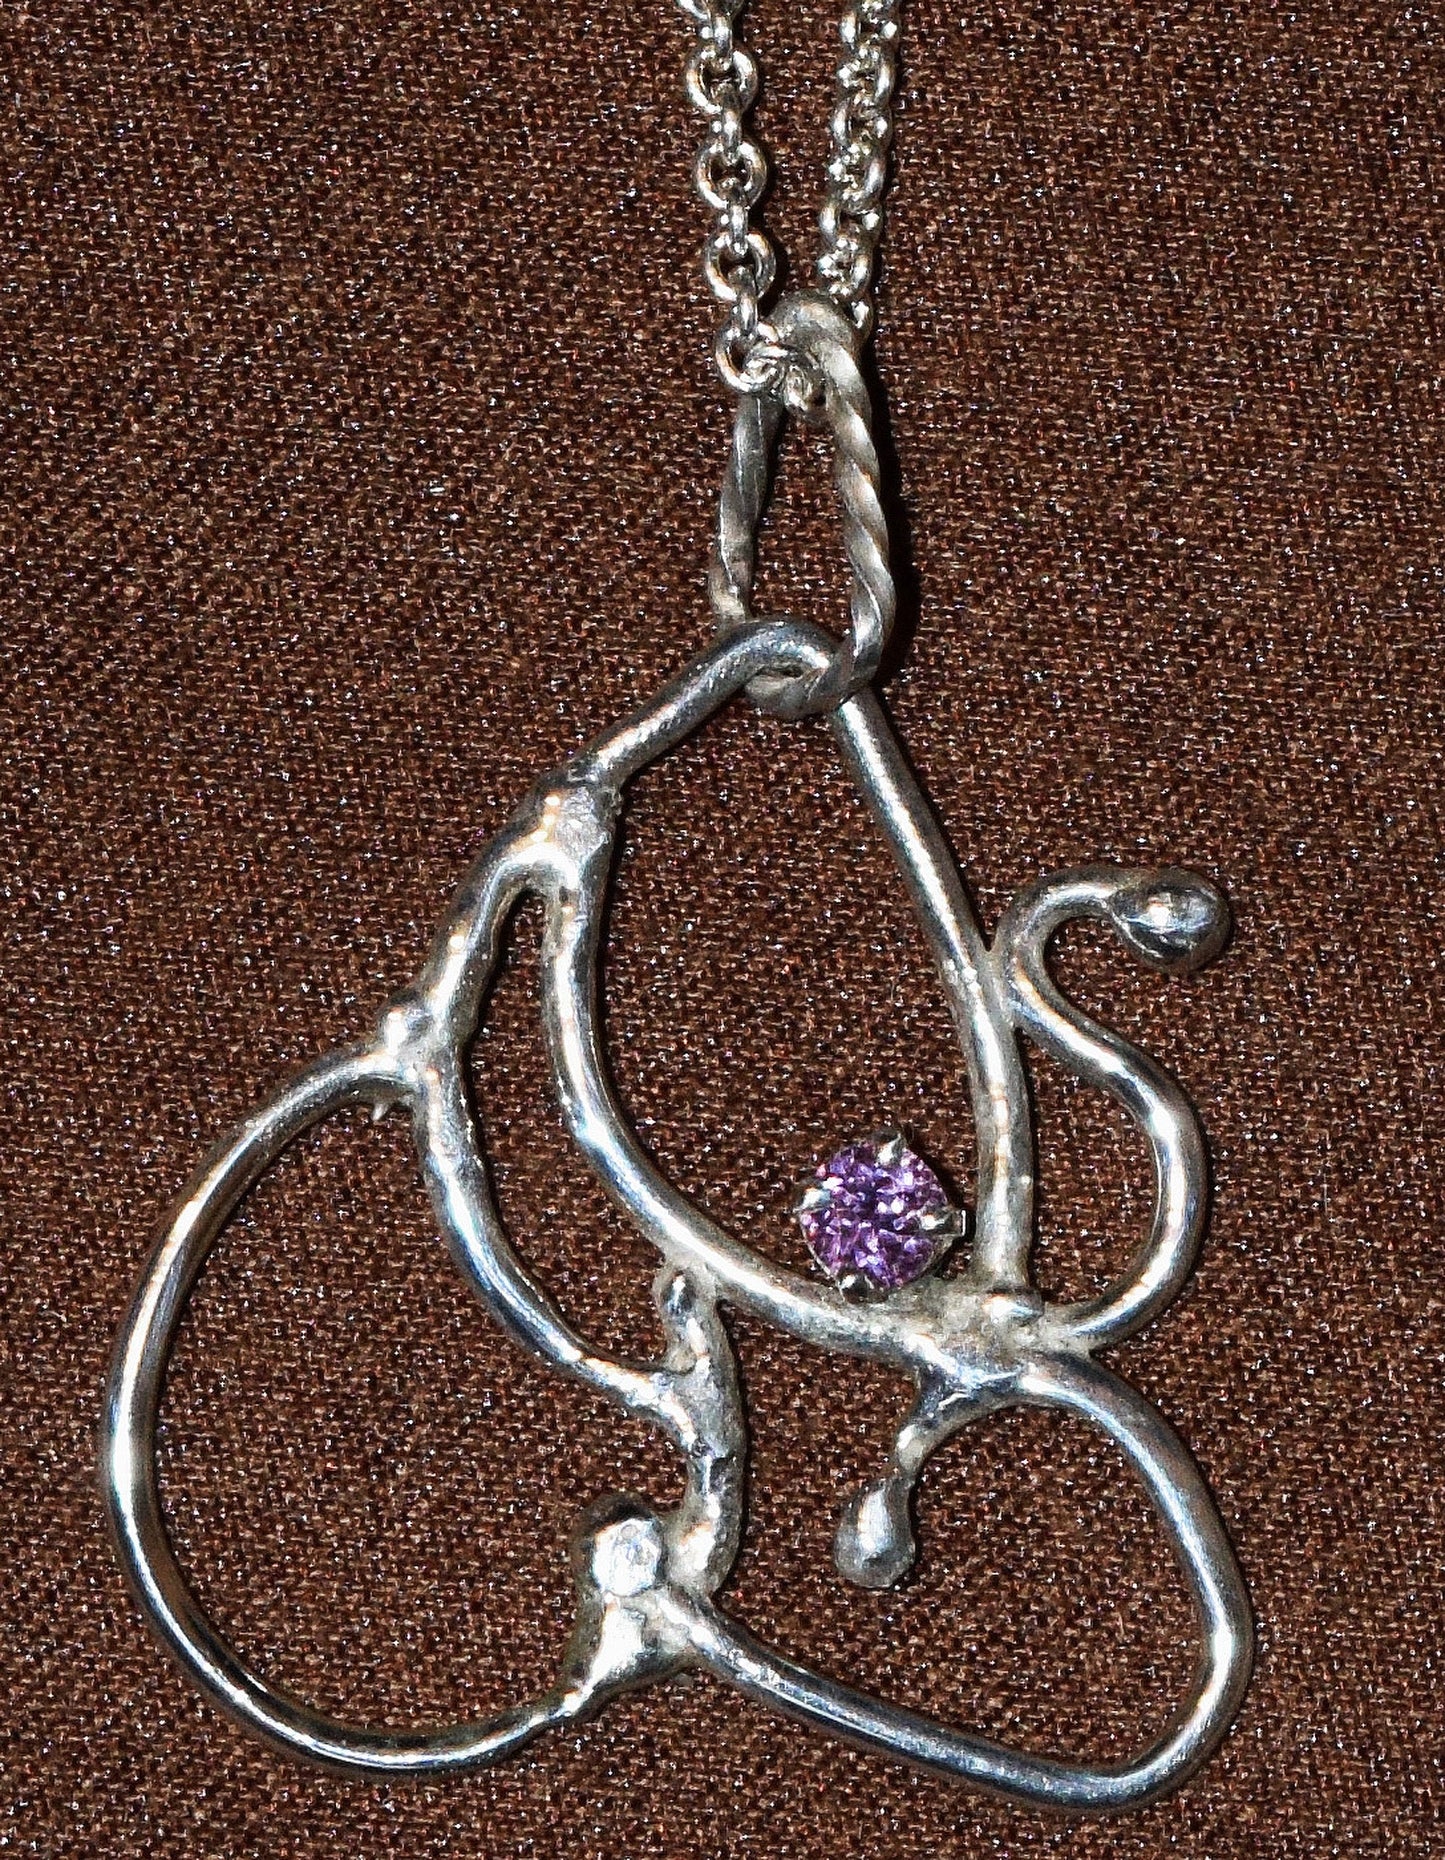 Handcrafted Sterling Silver pendant featuring a rare, purple Tanzanian Sapphire gemstone. Includes a 18-inch Sterling necklace.